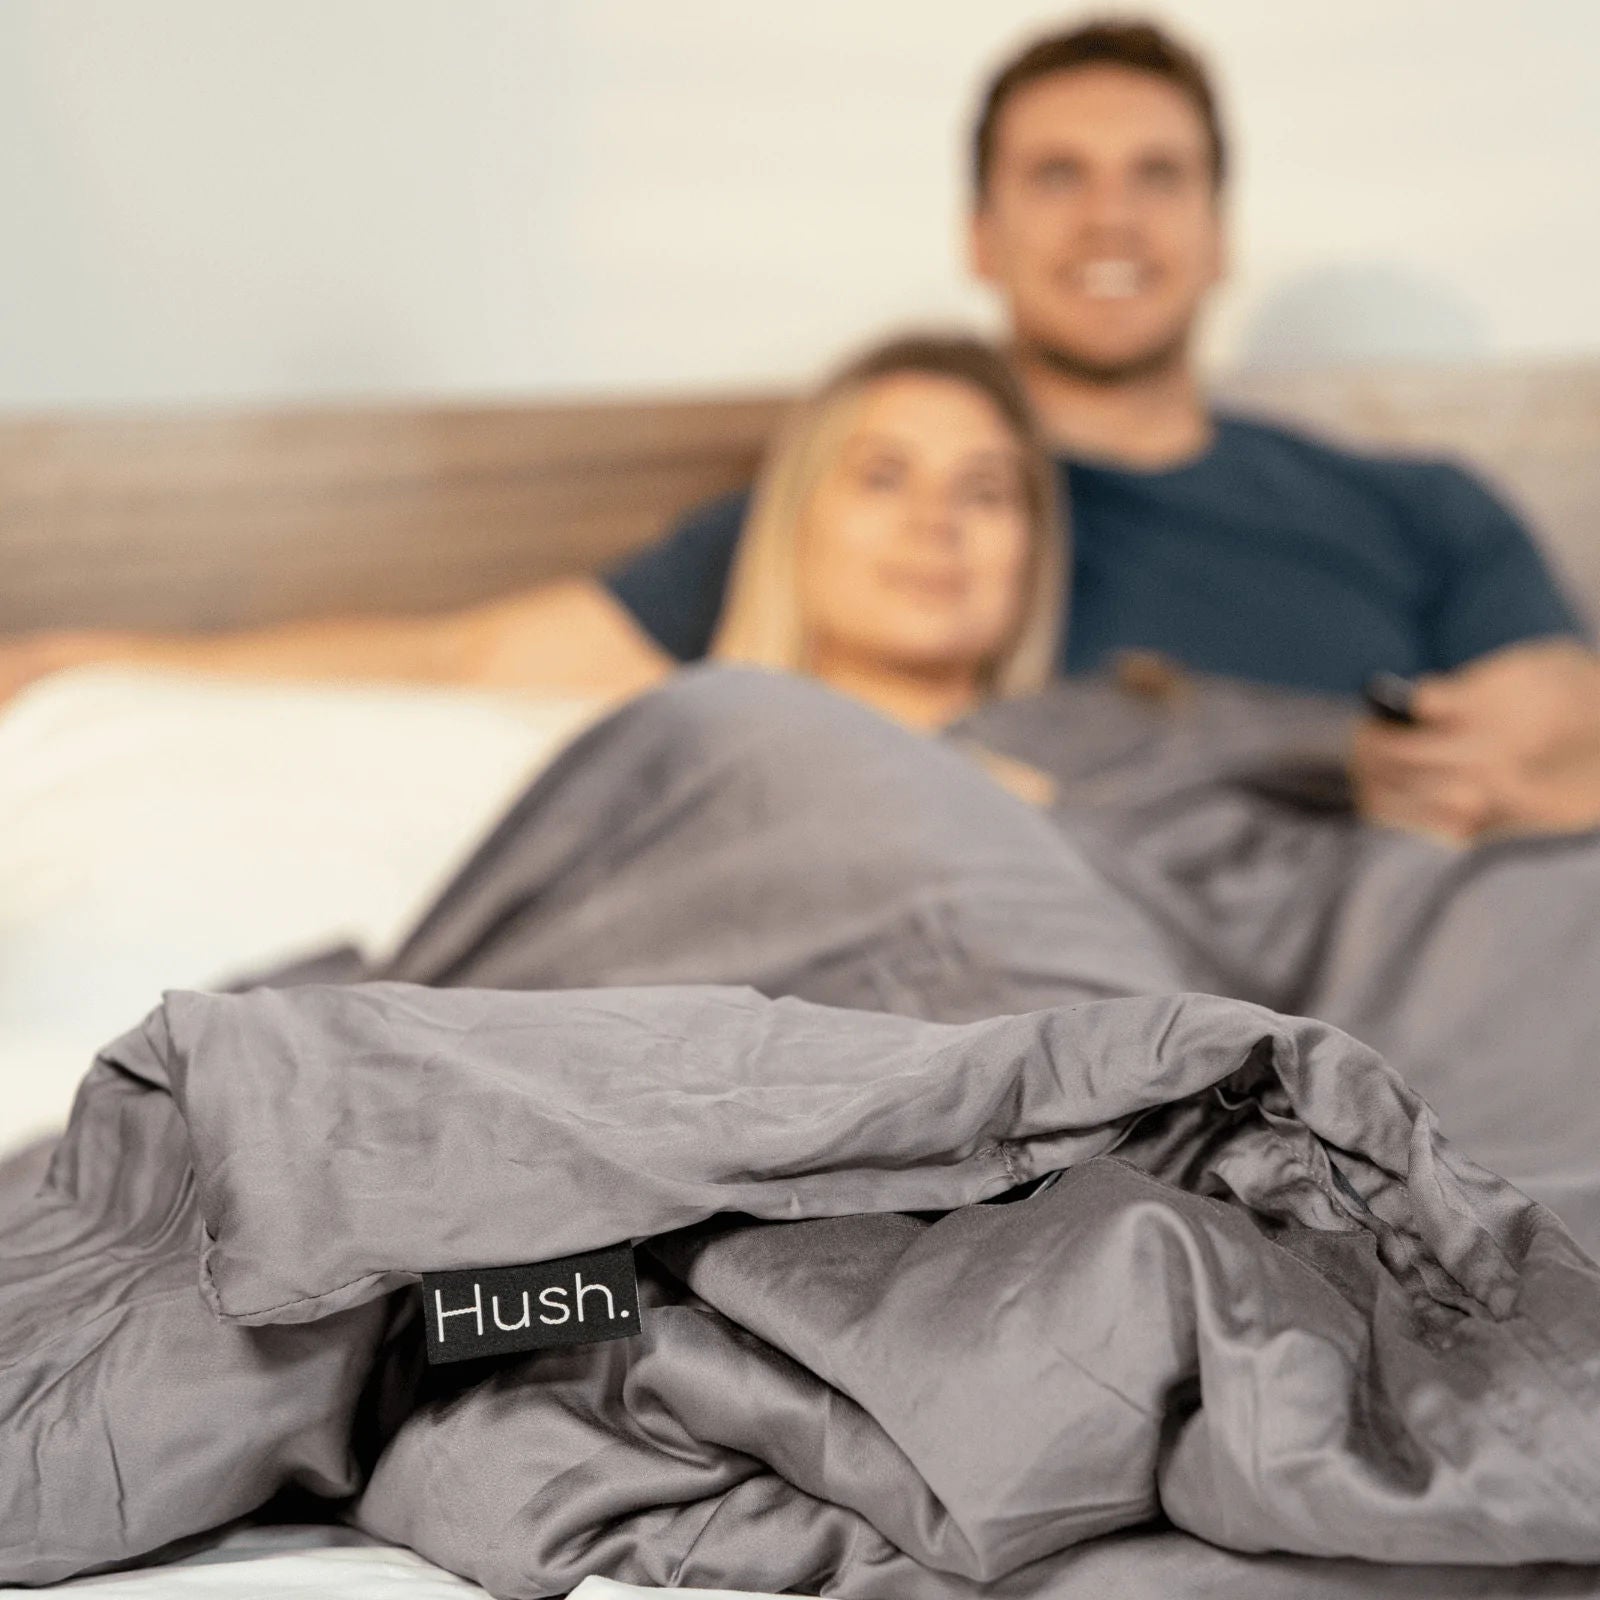 An out of focus couple under a Hush weighted blanket, with the tag saying “Hush” in focus.